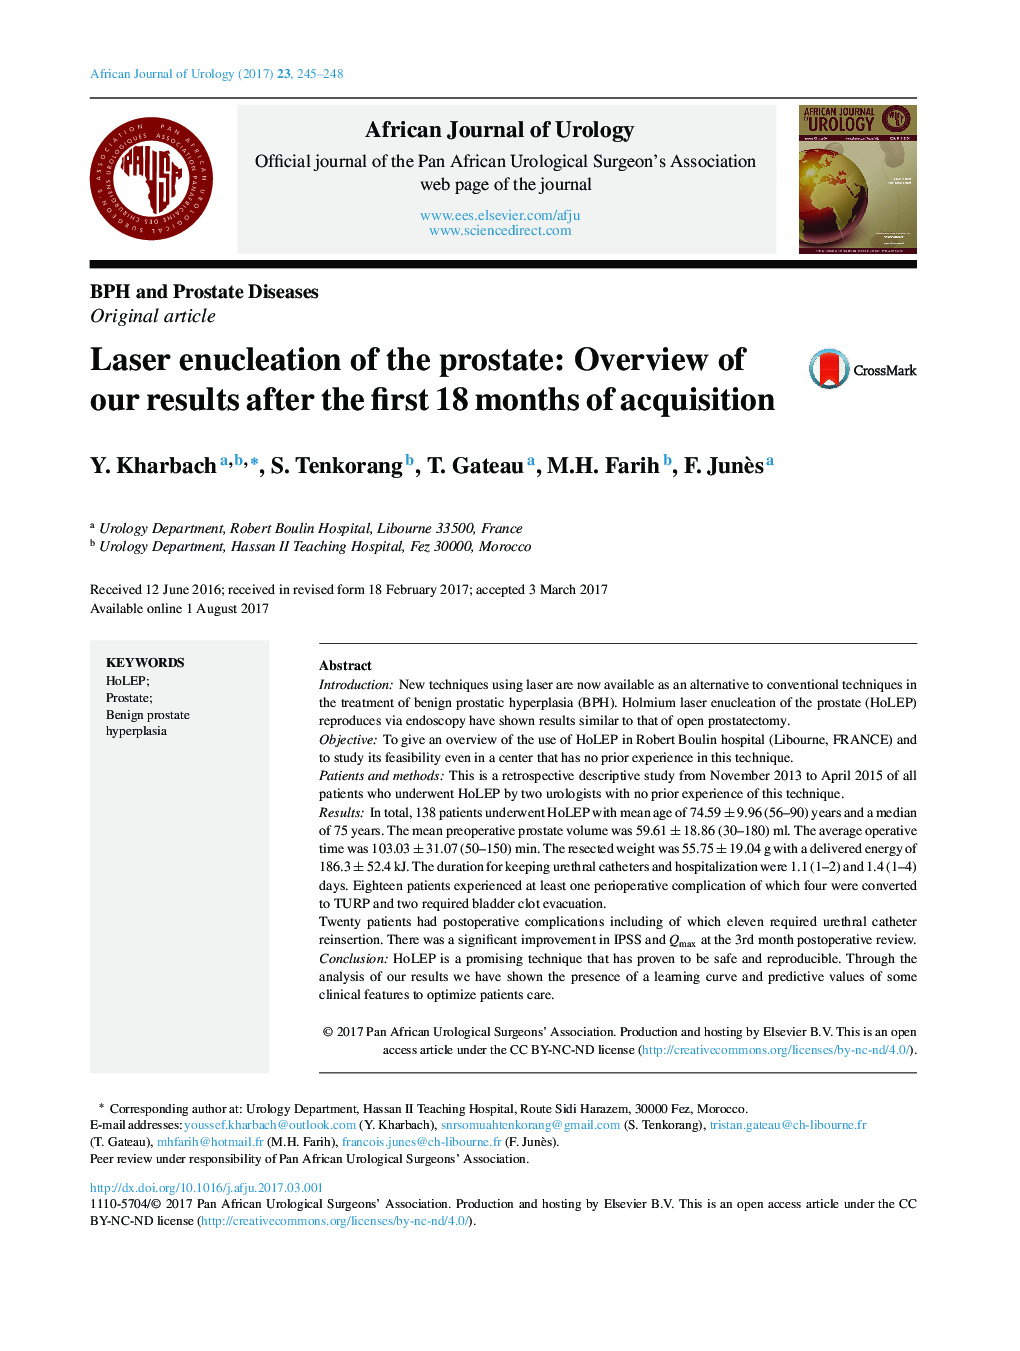 BPH and Prostate DiseasesOriginal articleLaser enucleation of the prostate: Overview of our results after the first 18 months of acquisition